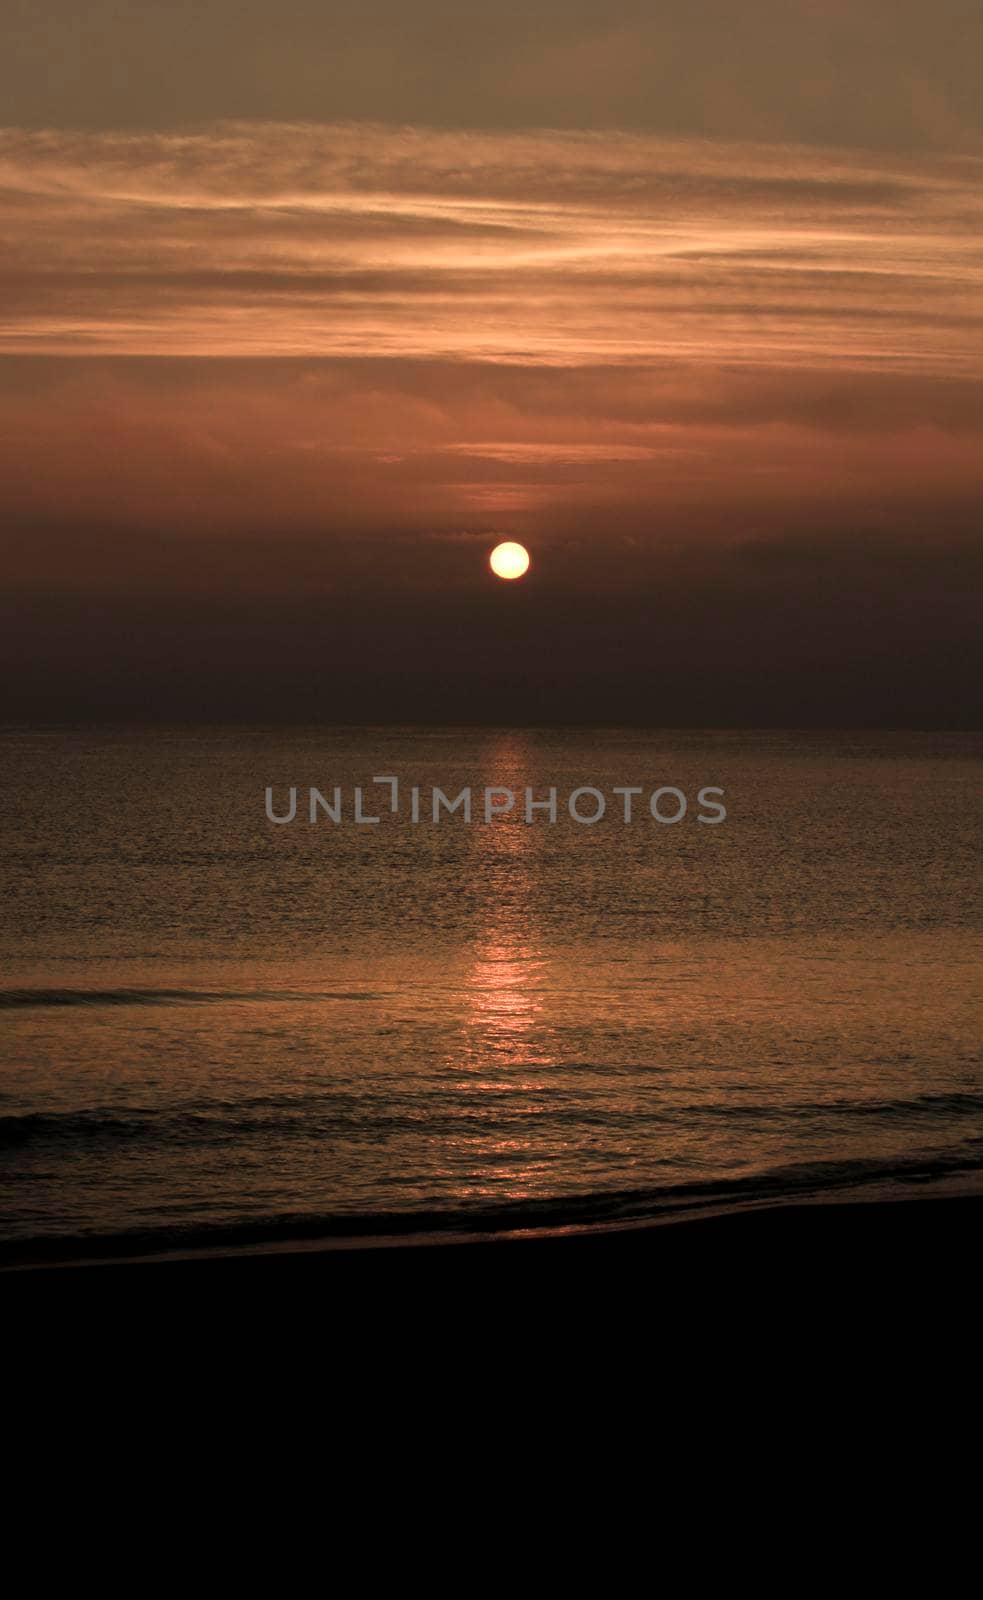 Beautiful Sunrise on the beach in winter in Arenales del Sol, Alicante,southern Spain